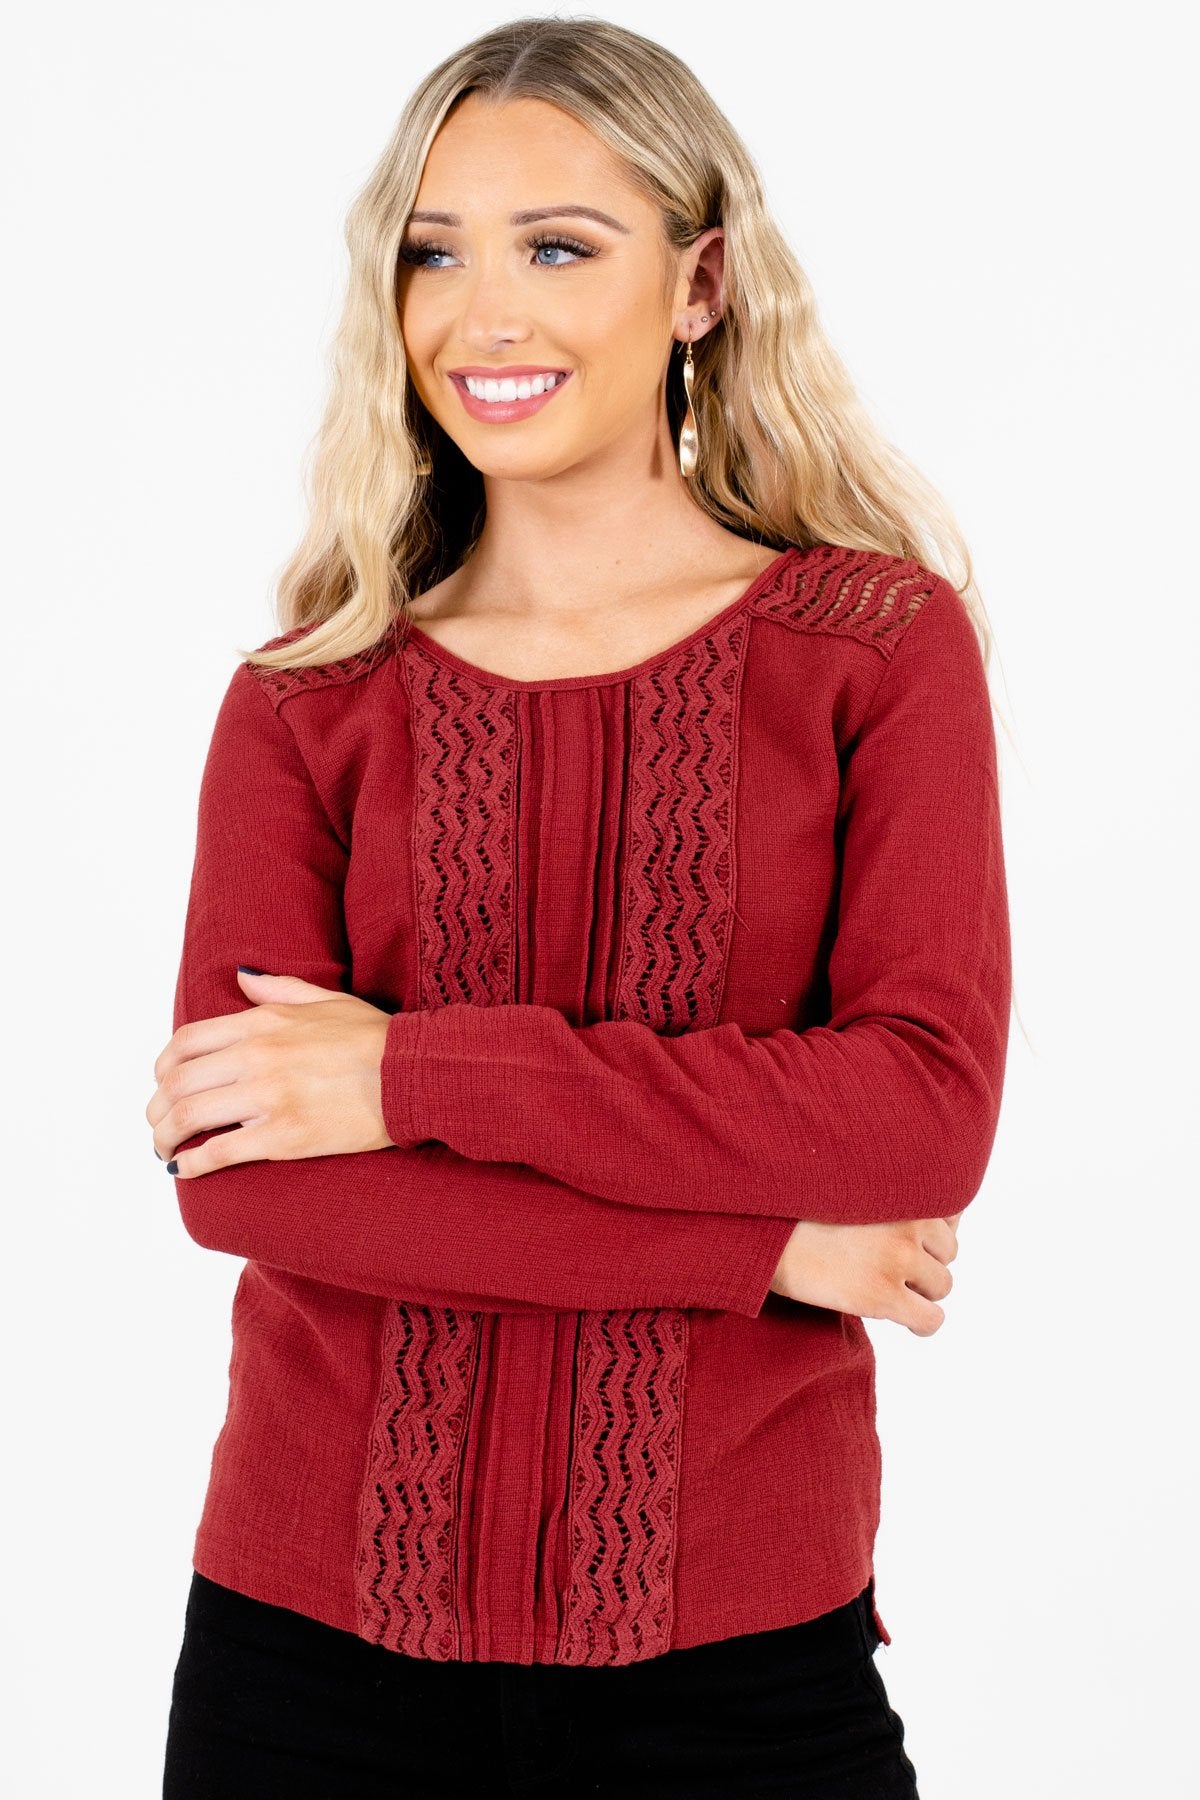 Women’s Rust Red Casual Everyday Boutique Tops